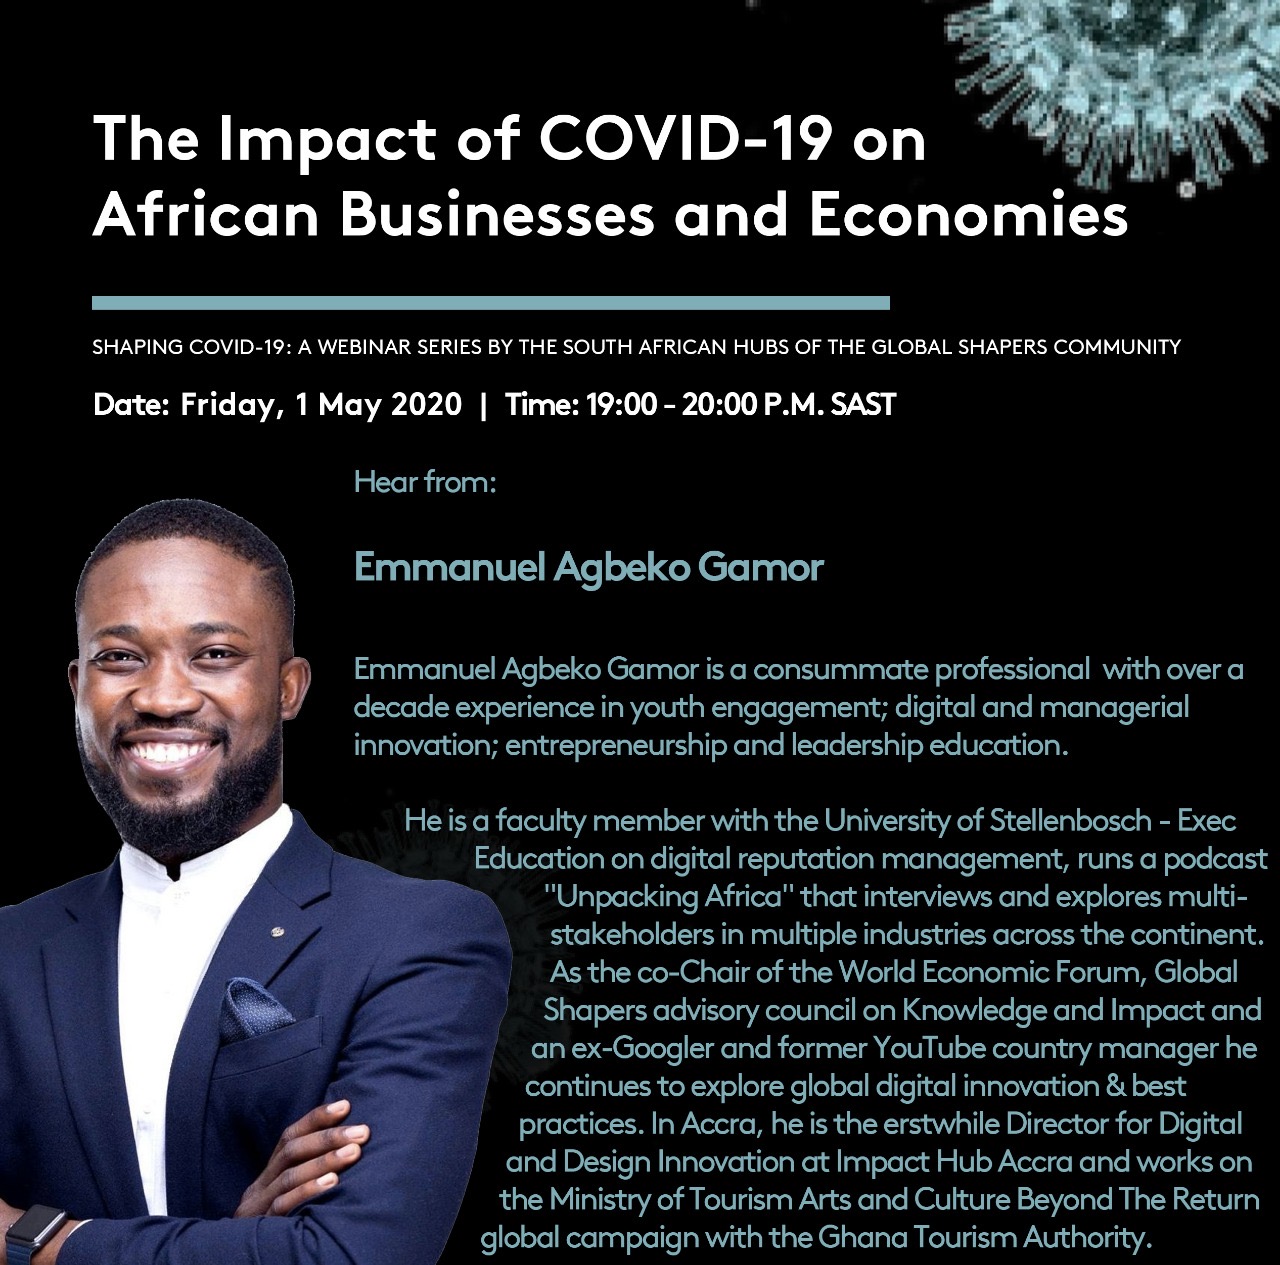 The Impact pf Covid19 on African Businesses - Emmanuel Gamor